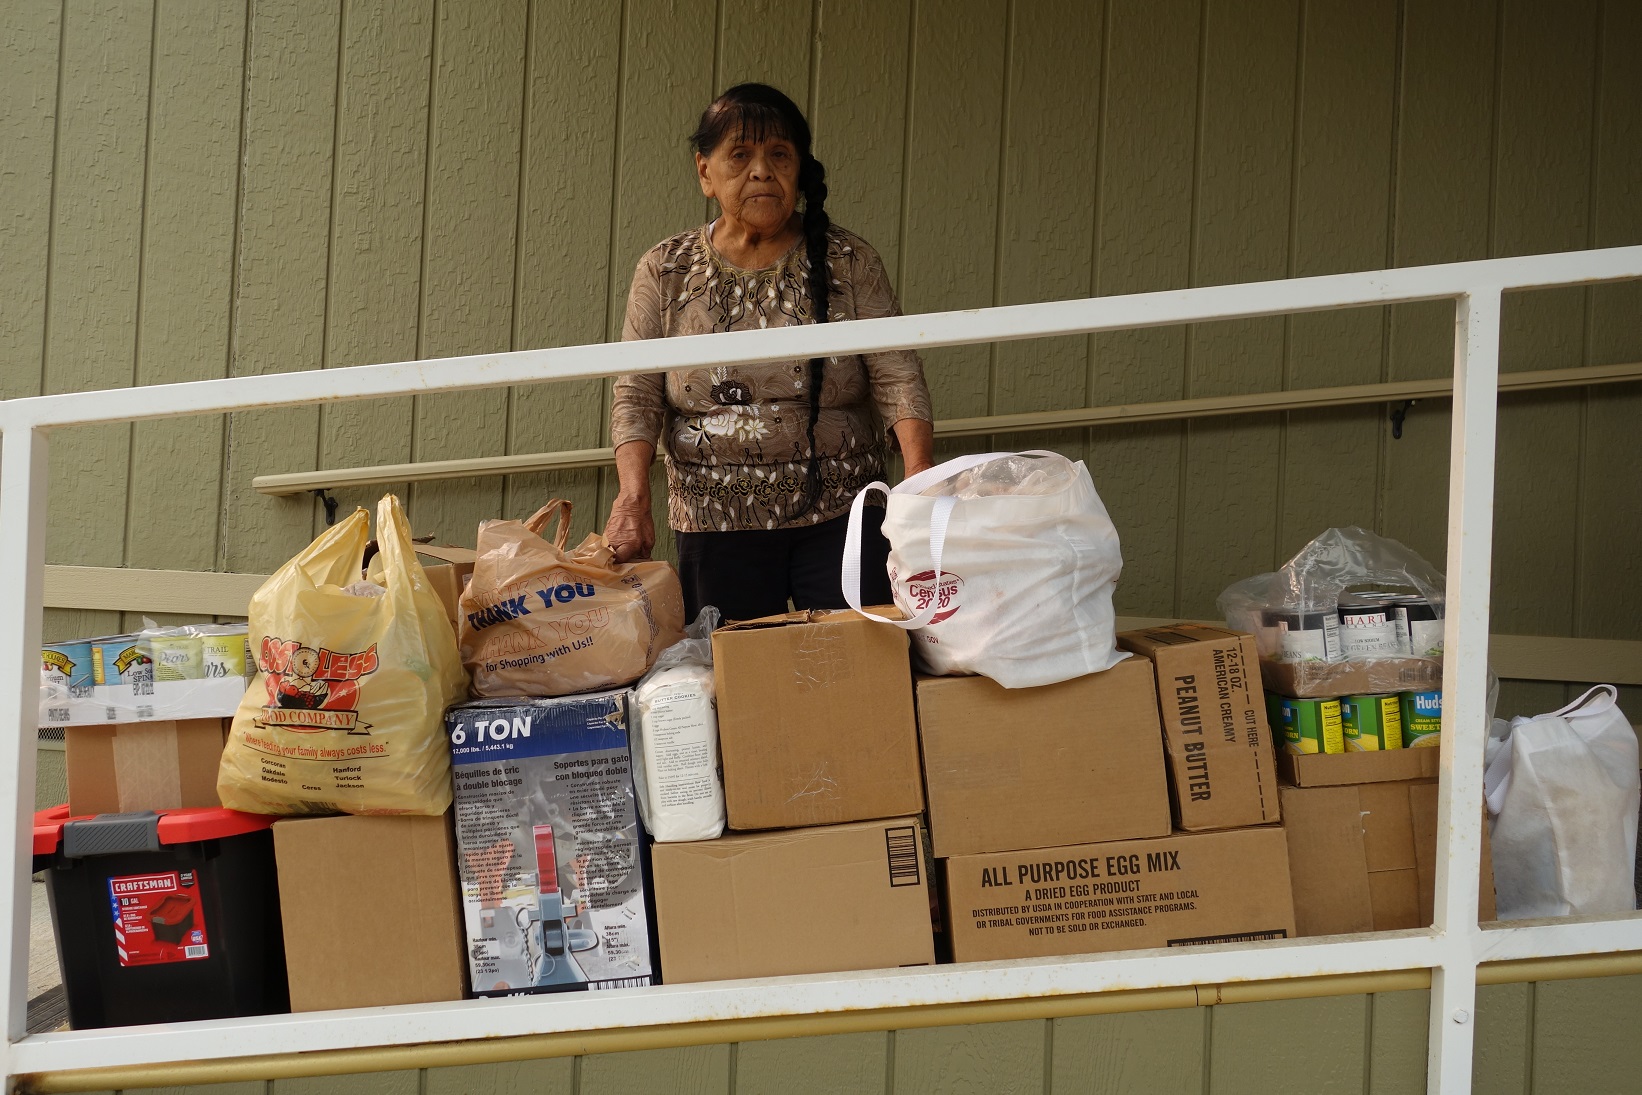 California Valley Miwok Tribal elder Mildred Burley standing with lots of donated good supplies.